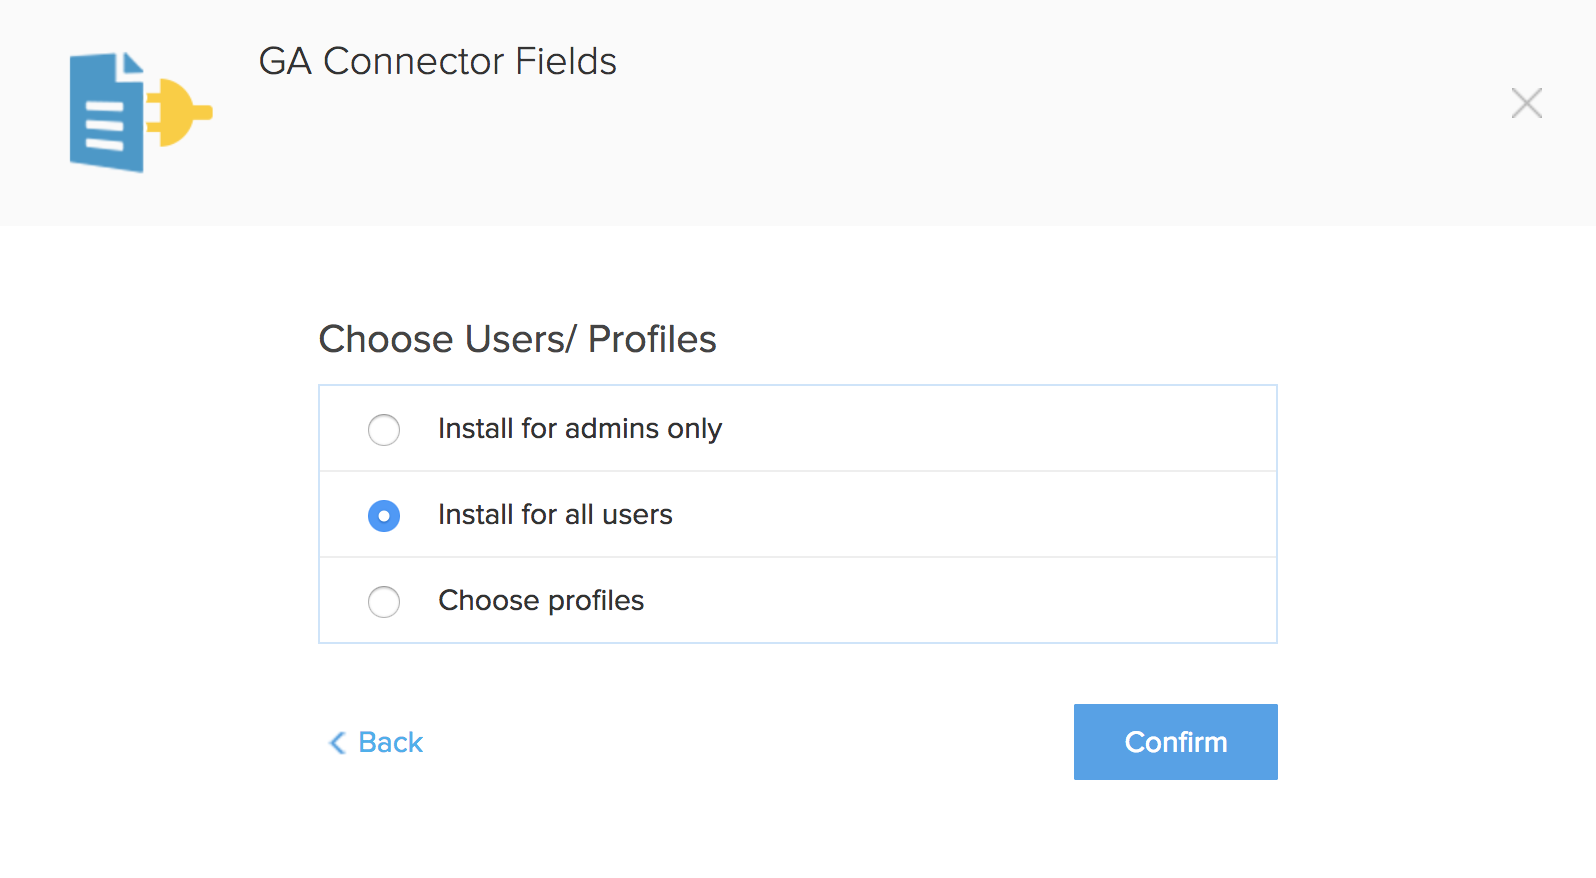 Install GA Connector fields for all users